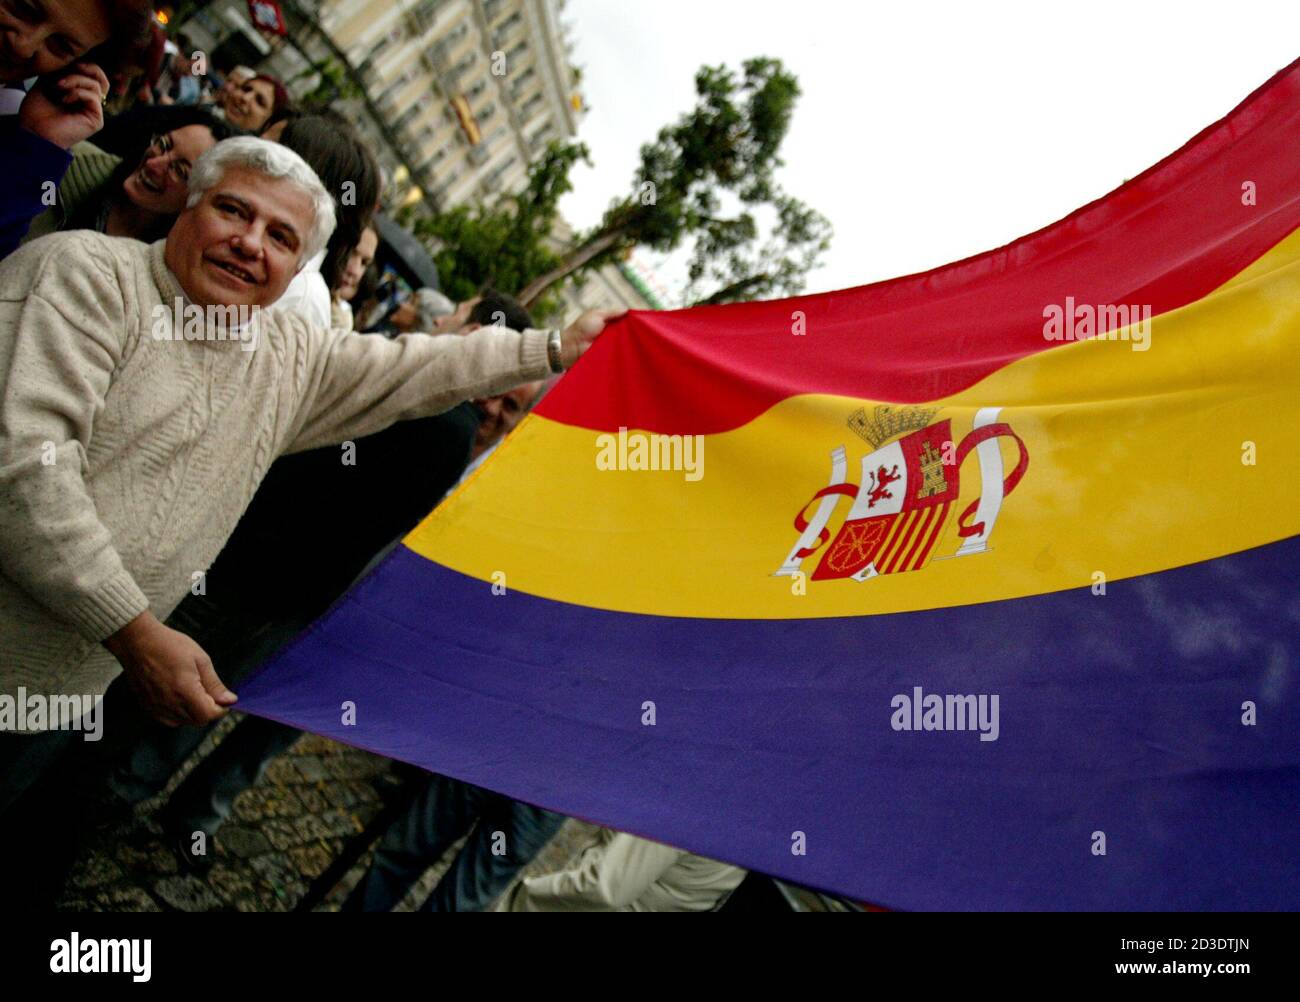 A protester shows a Spanish Republican flag during a demonstration by more than 500 anti-monarchists in Madrid, May 21, 2003, [on the eve of the wedding of Crown Prince Felipe to divorced journalist Letizia Ortiz]. Police blocked the demonstrators' access to Madrid's historic Puerta del Sol square as they waved Republican flags and chanted 'Spain, tomorrow will be Republican! Stock Photo